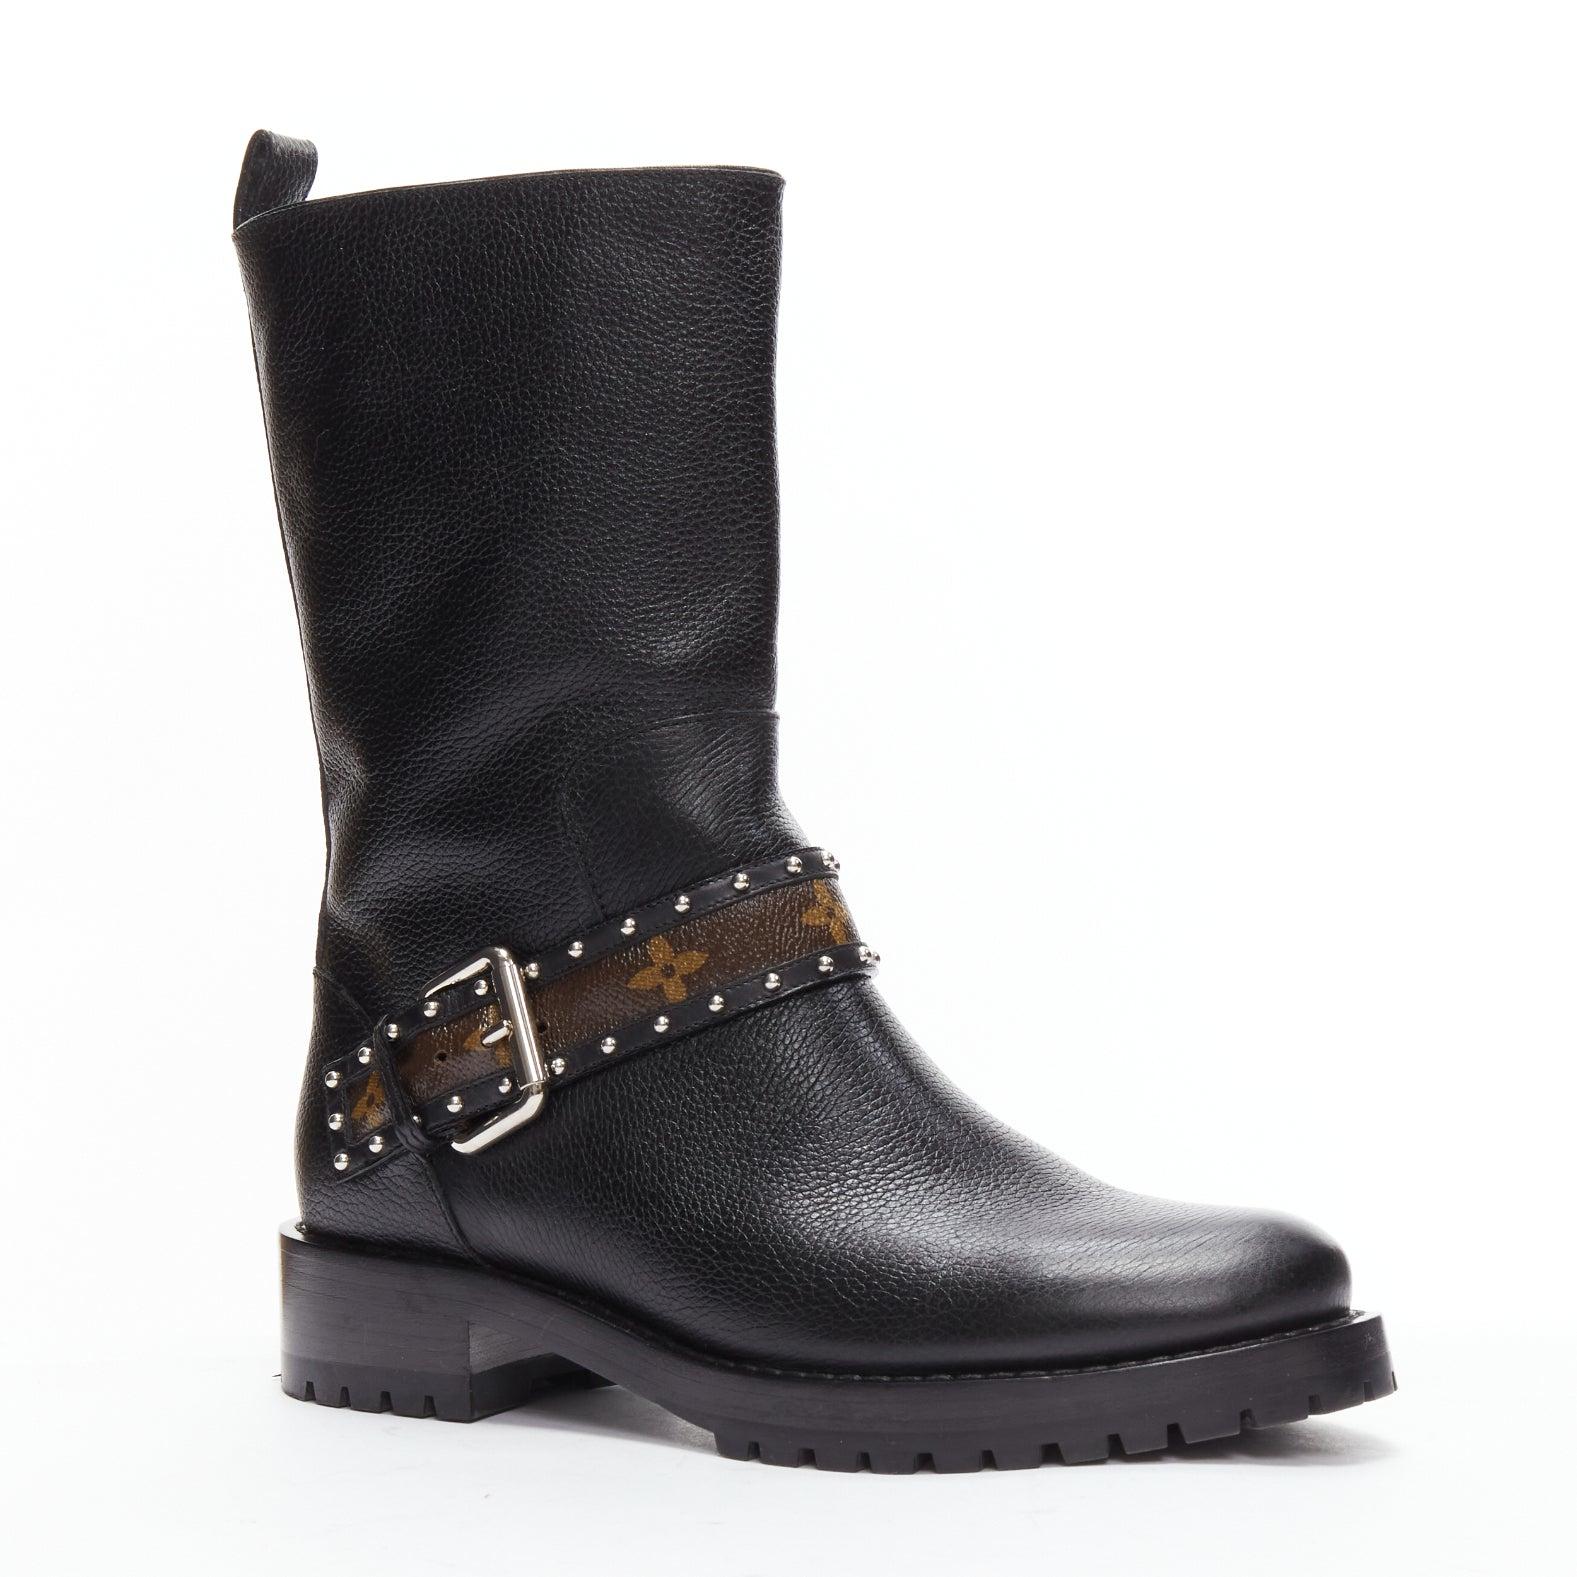 LOUIS VUITTON LV monogram top strap pull on motorcycle boots EU37
Reference: TGAS/D00668
Brand: Louis Vuitton
Designer: Nicolas Ghesquiere
Material: Leather, Canvas
Color: Black, Brown
Pattern: Monogram
Closure: Slip On
Lining: Black Leather
Extra